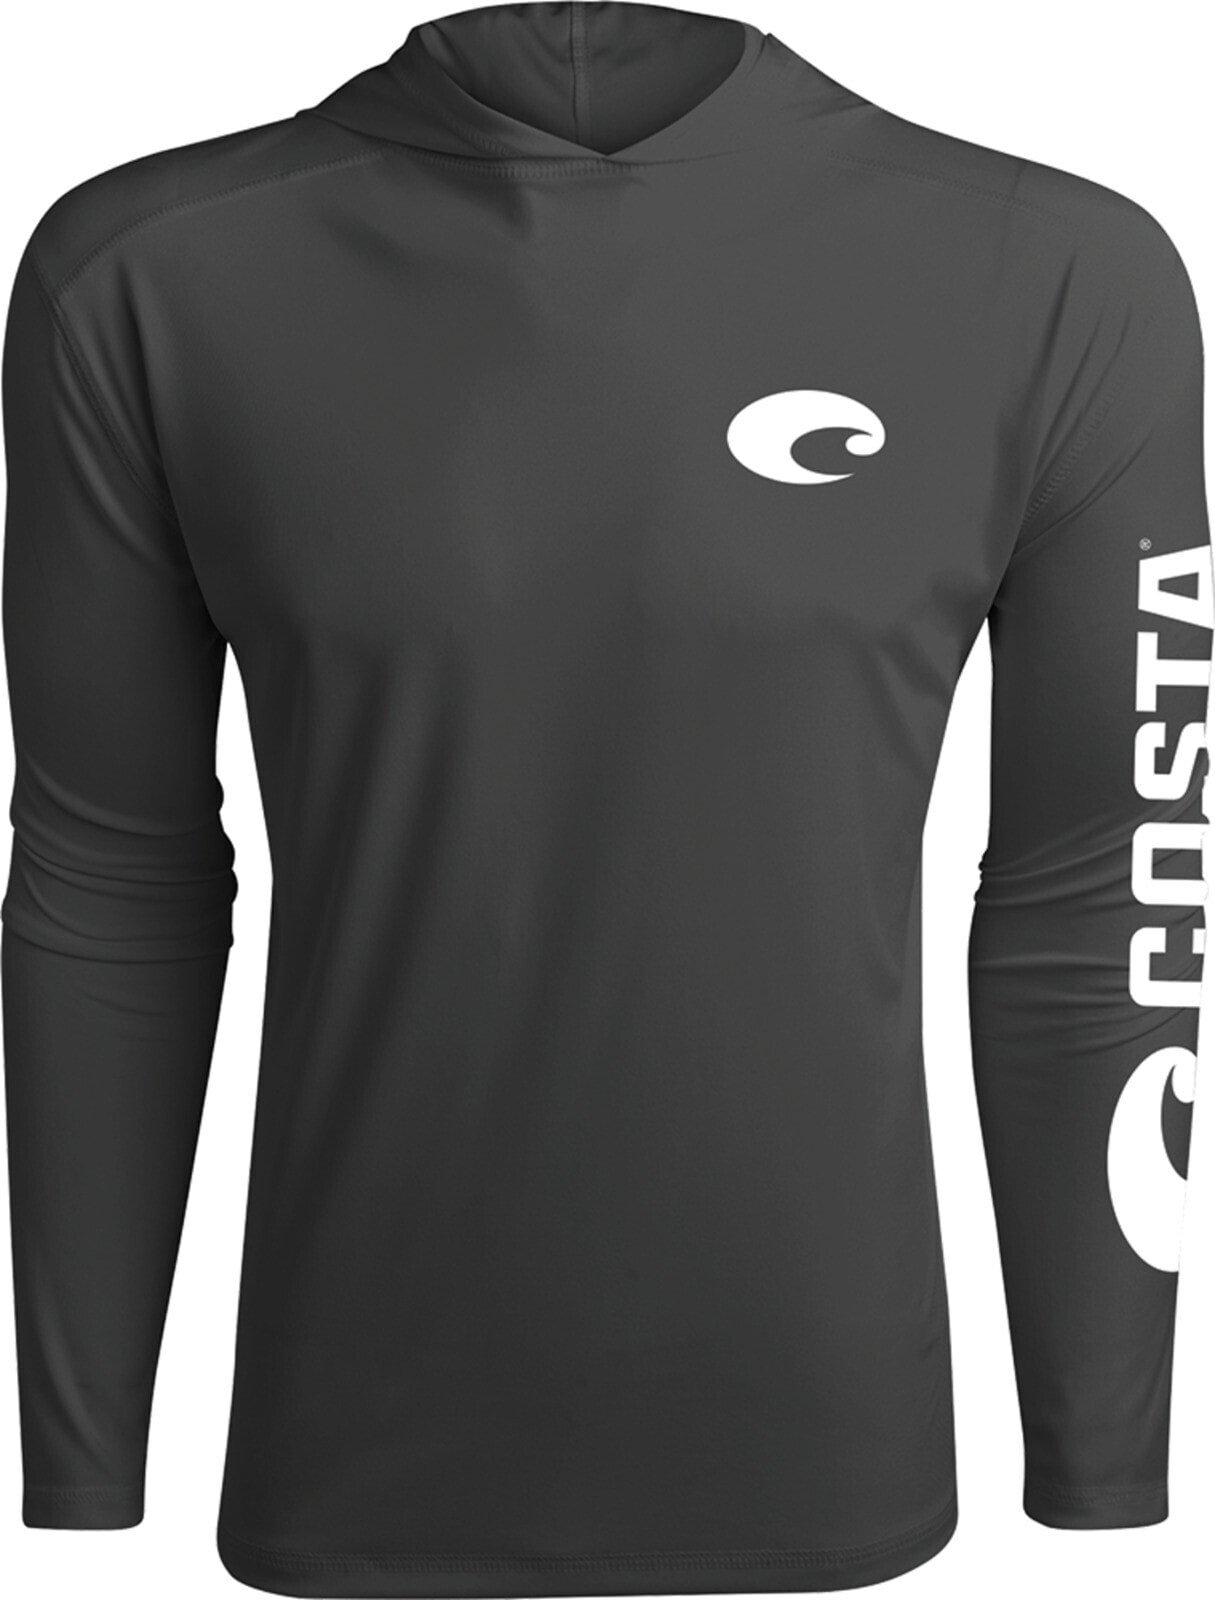 40% Off Costa Technical Performance Fishing Hoodie - Gray - Pick Size-Free Ship